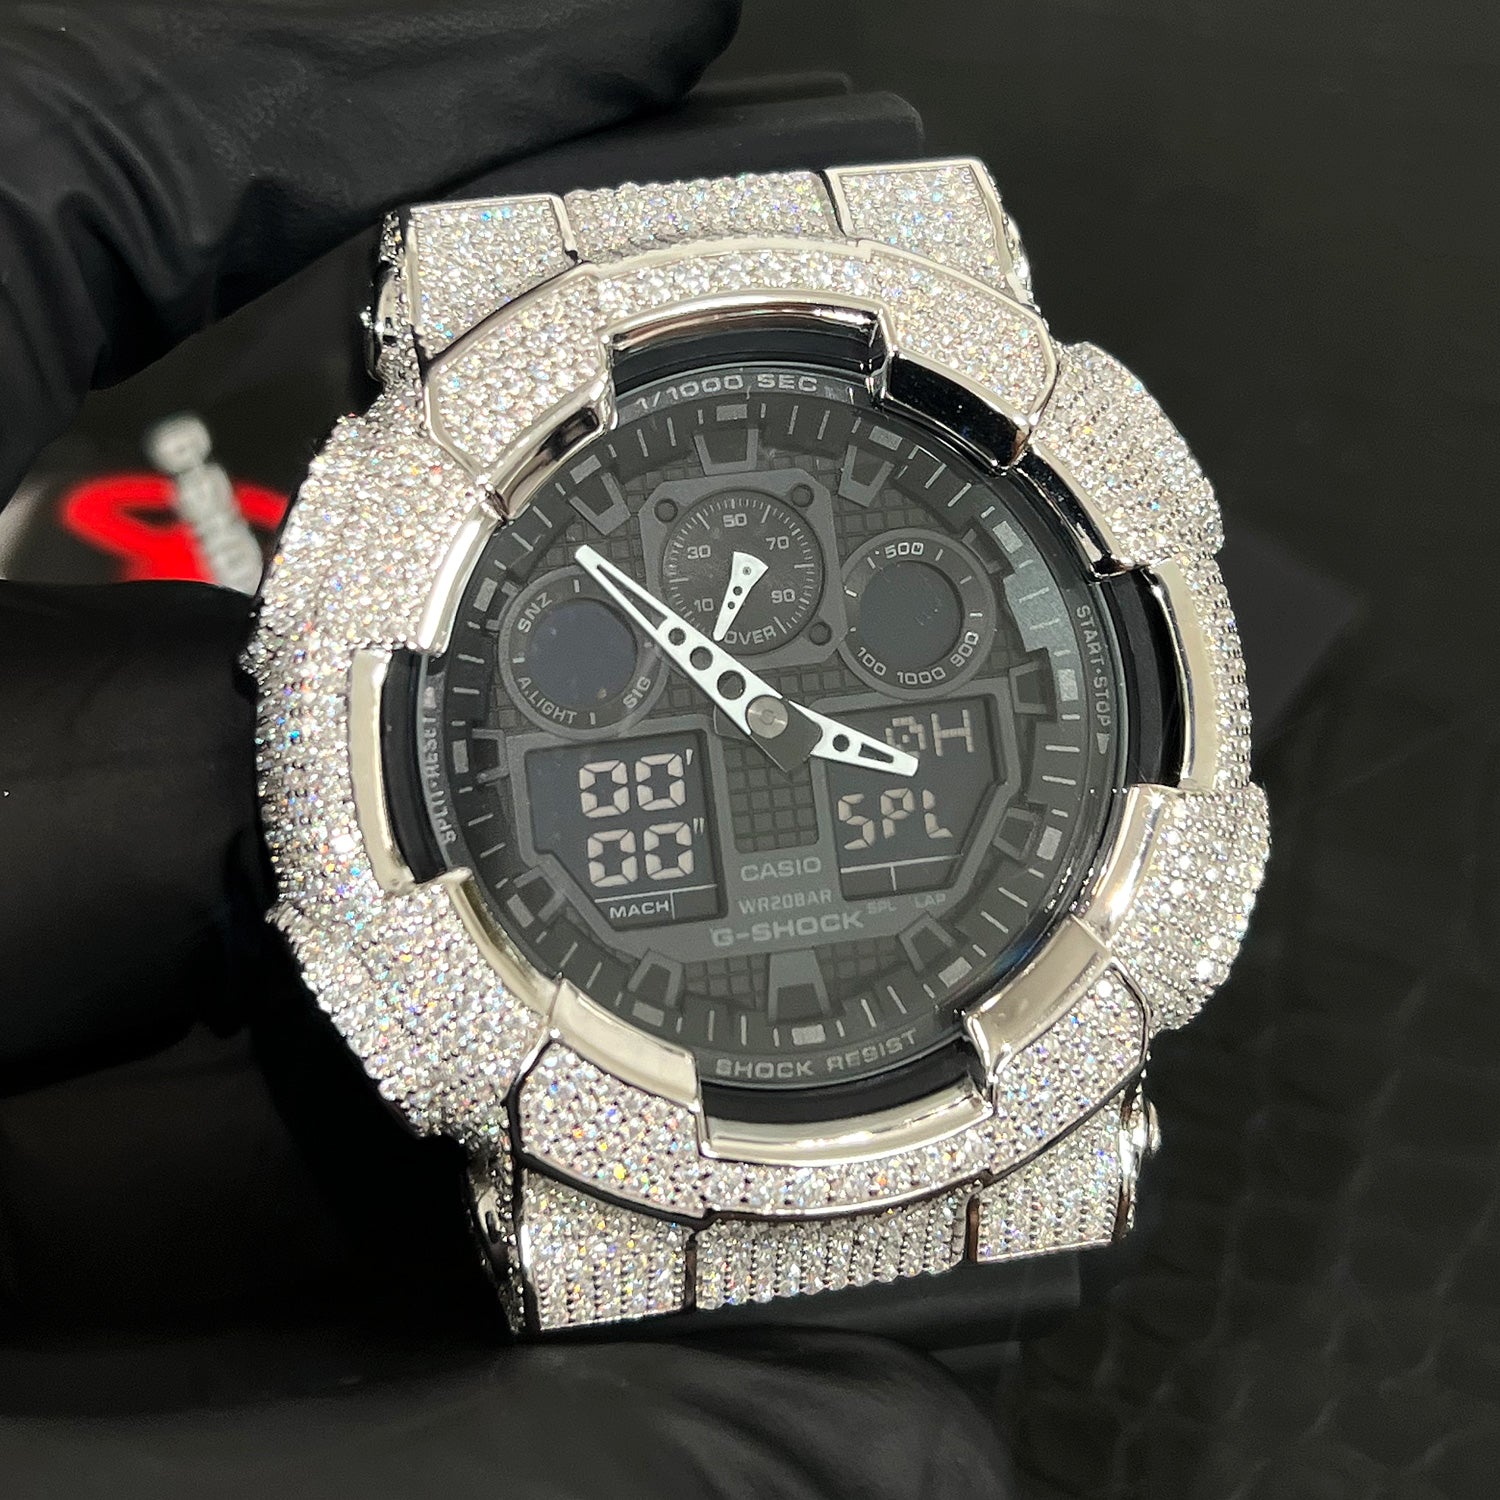 6.58 CTW Moissanite Iced Out Casio G Shock – JewelryFresh